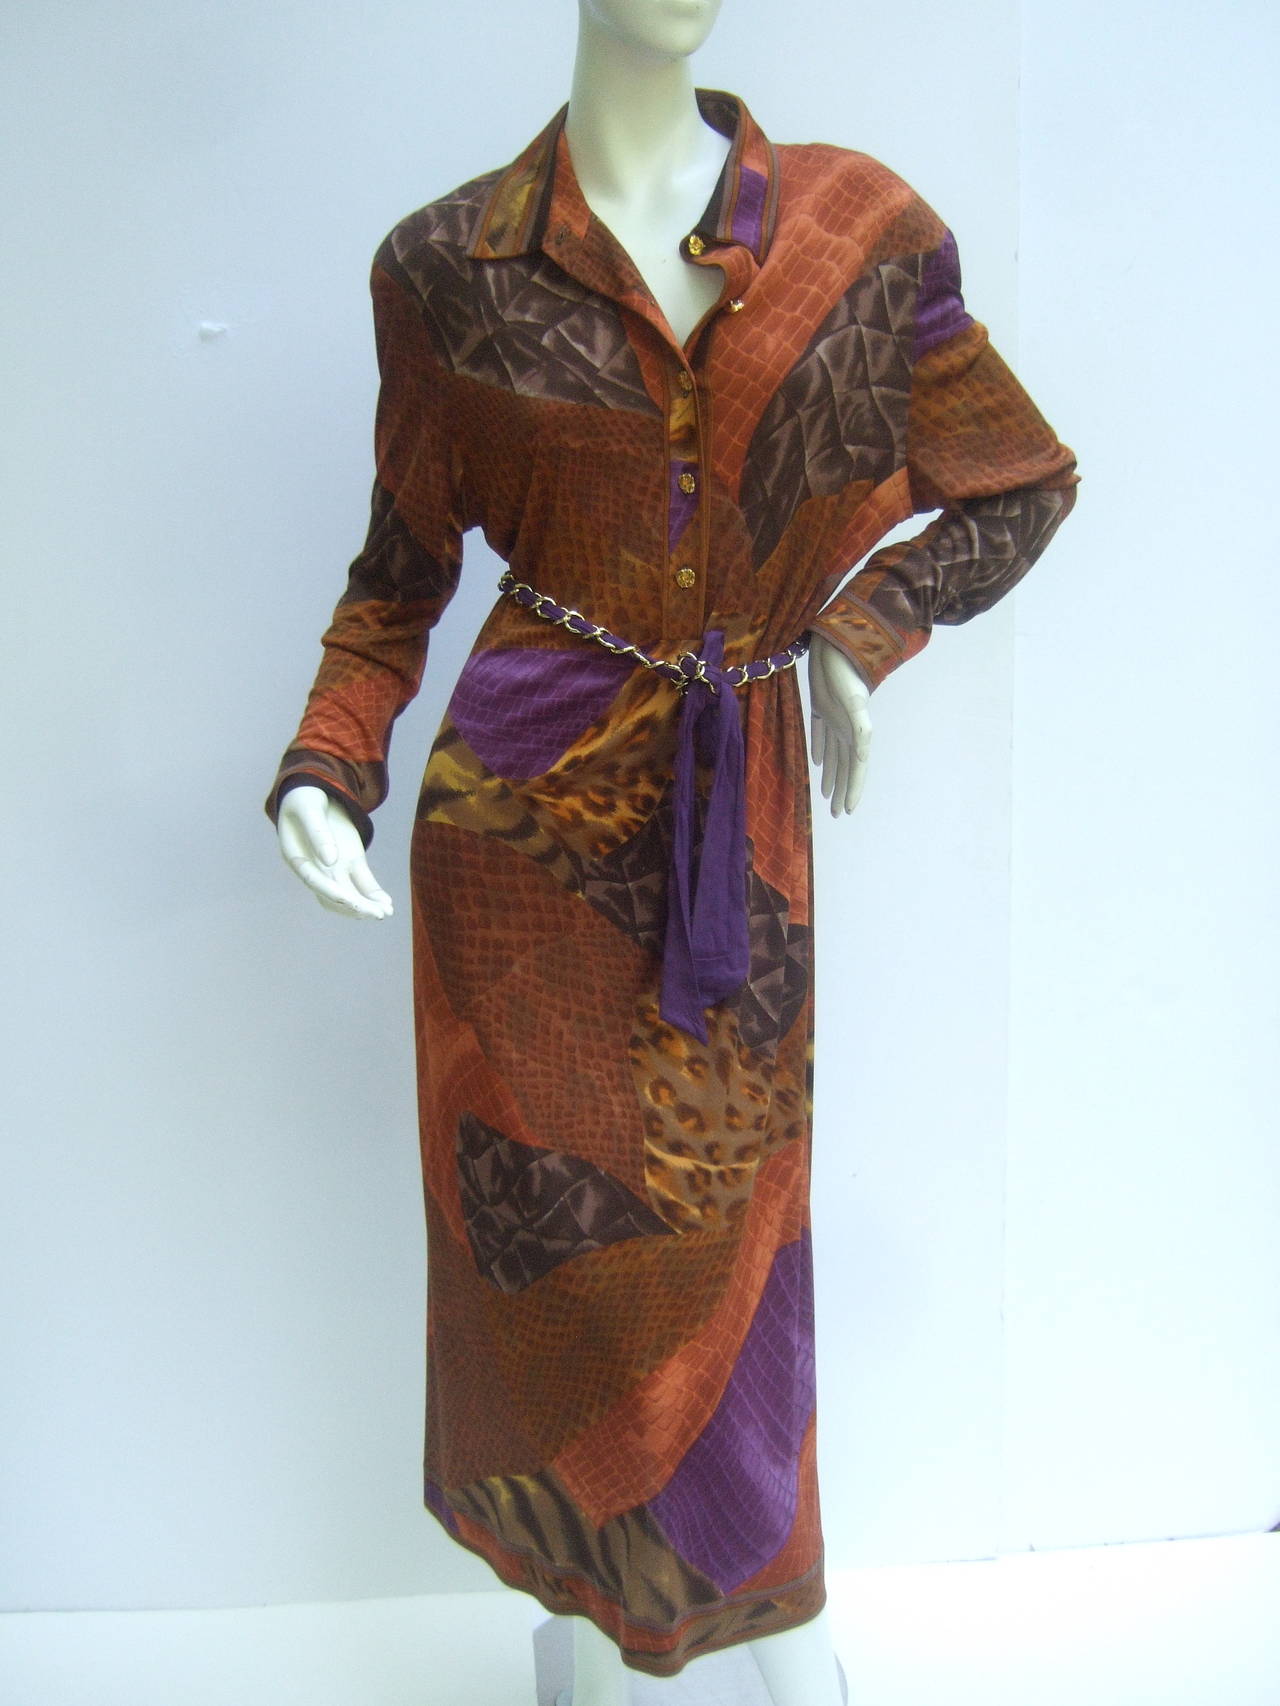 Leonard Paris silk jersey print dress Made in Italy c 1990s
The stylish dress is designed with a collage of autumn colors
The vibrant print is illustrated with a myriad of reptile skin 
and exotic animal fur print graphics. Leonard's name is